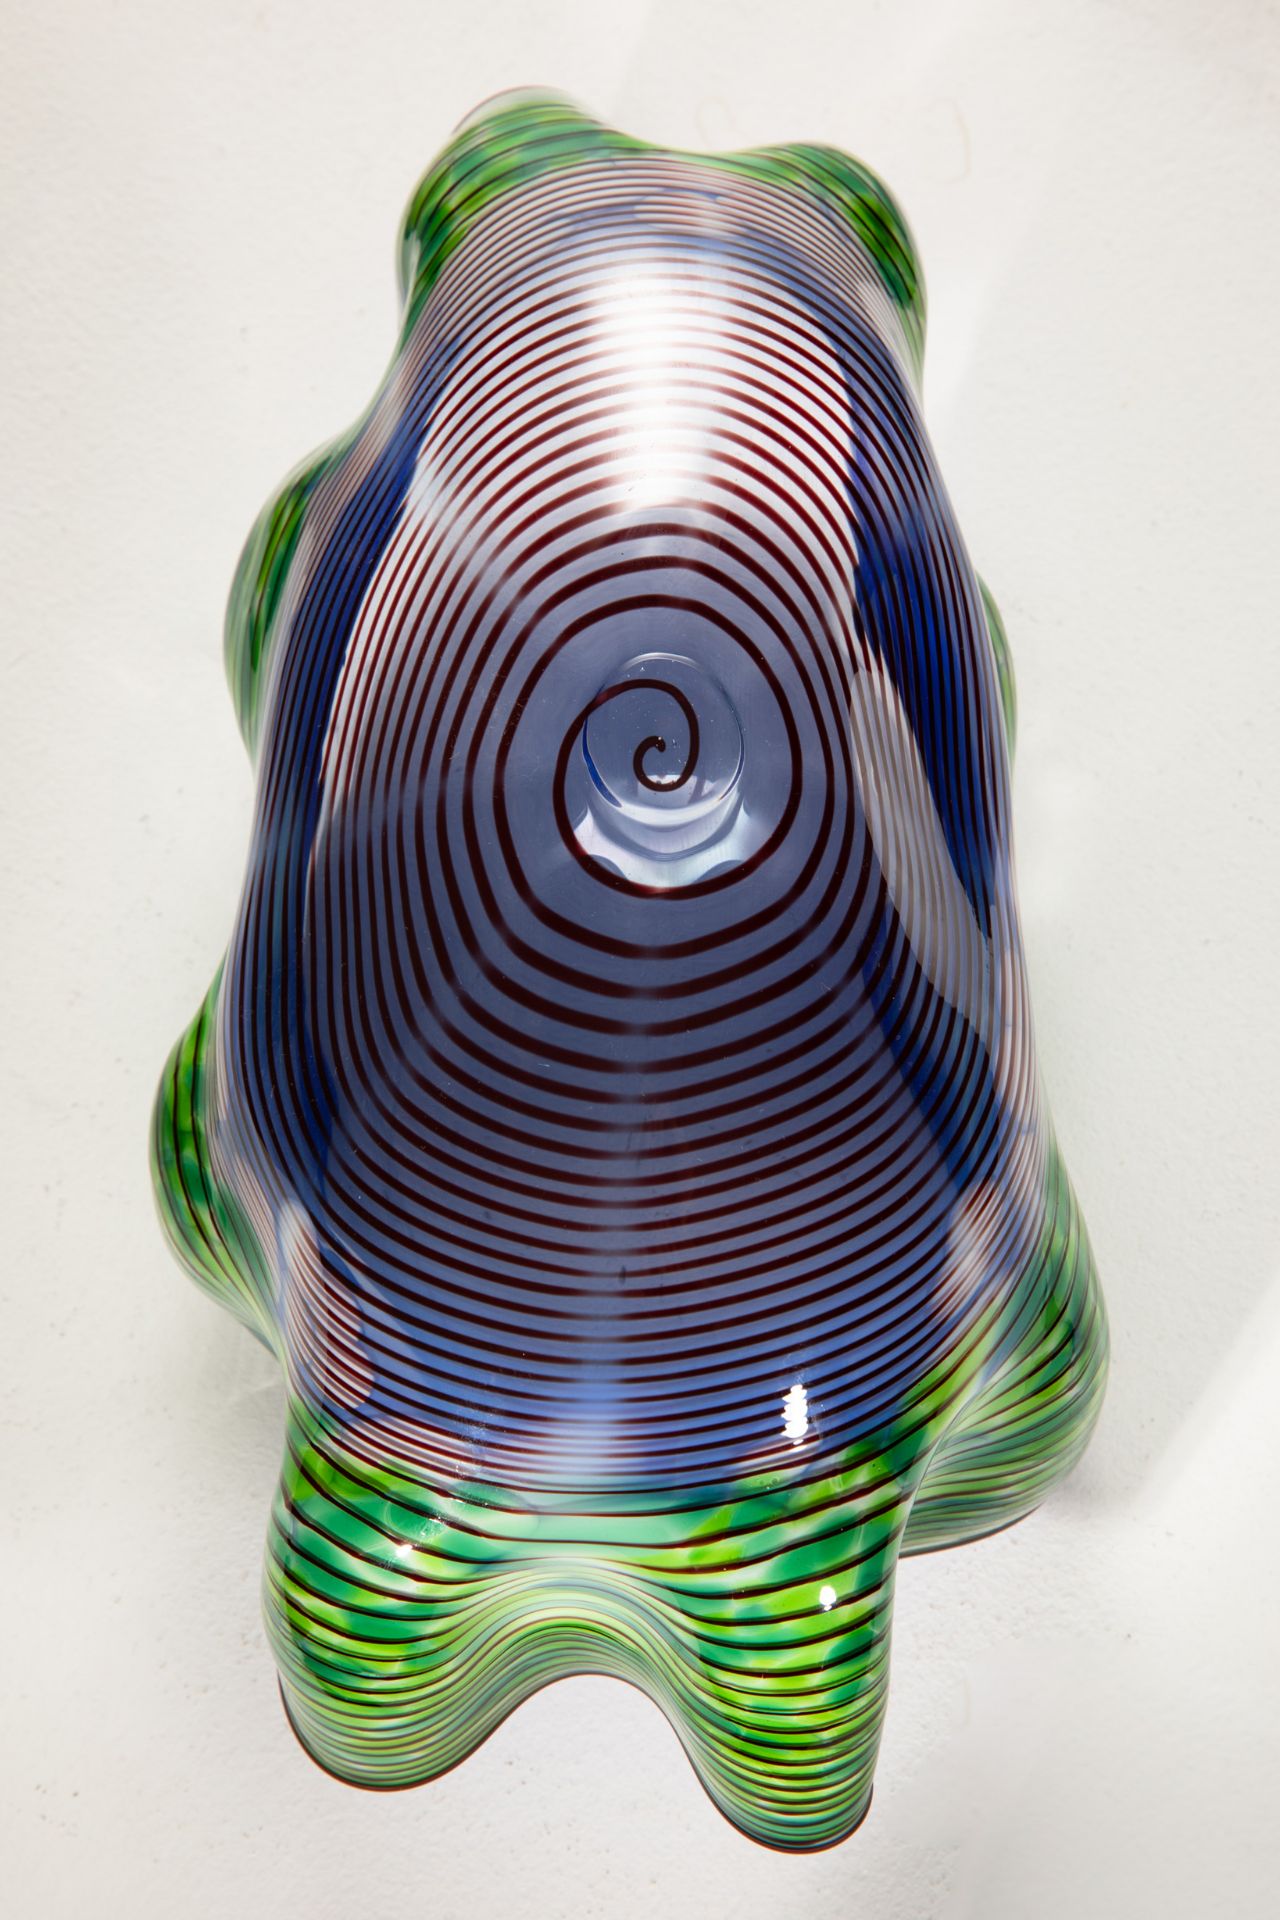 Dale Chihuly, 3 seaforms piece sculptural glasforms - Image 6 of 17